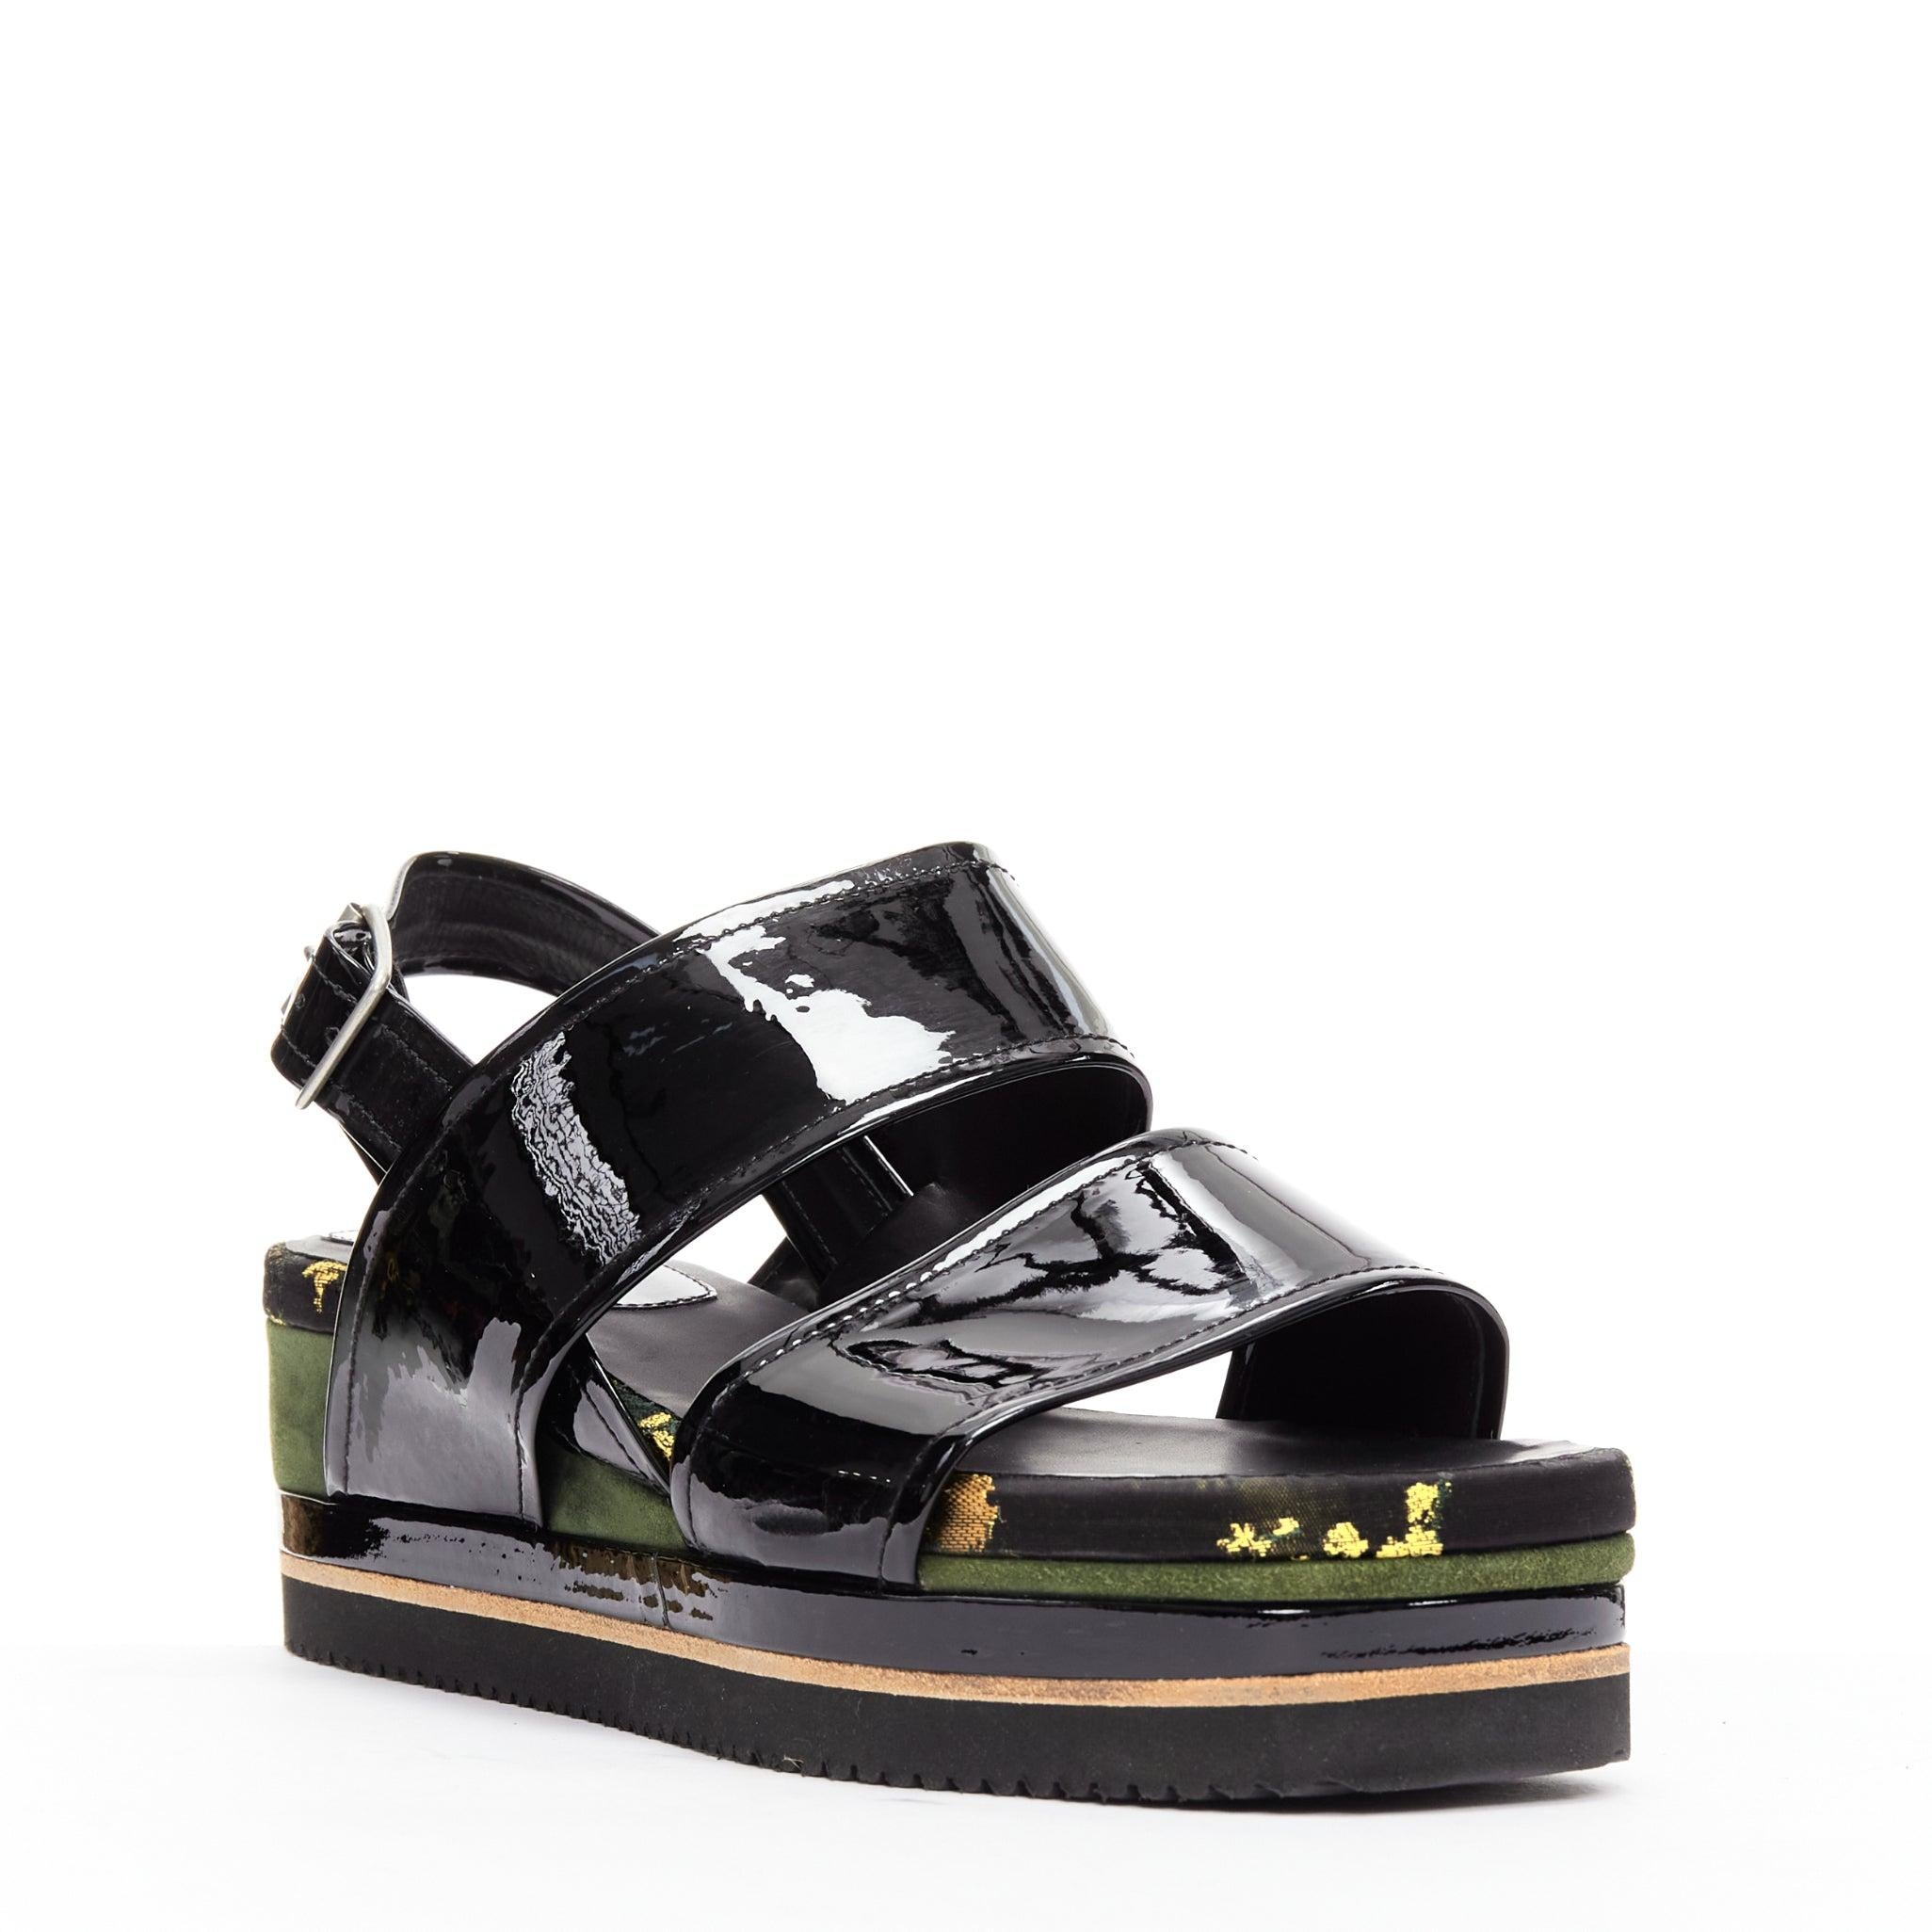 DRIES VAN NOTEN balck patent floral broade green suede platform sandal EU36.5
Reference: CELG/A00362
Brand: Dries Van Noten
Material: Patent Leather, Suede, Fabric
Color: Black, Green
Pattern: Floral
Closure: Buckle
Extra Details: Black patent